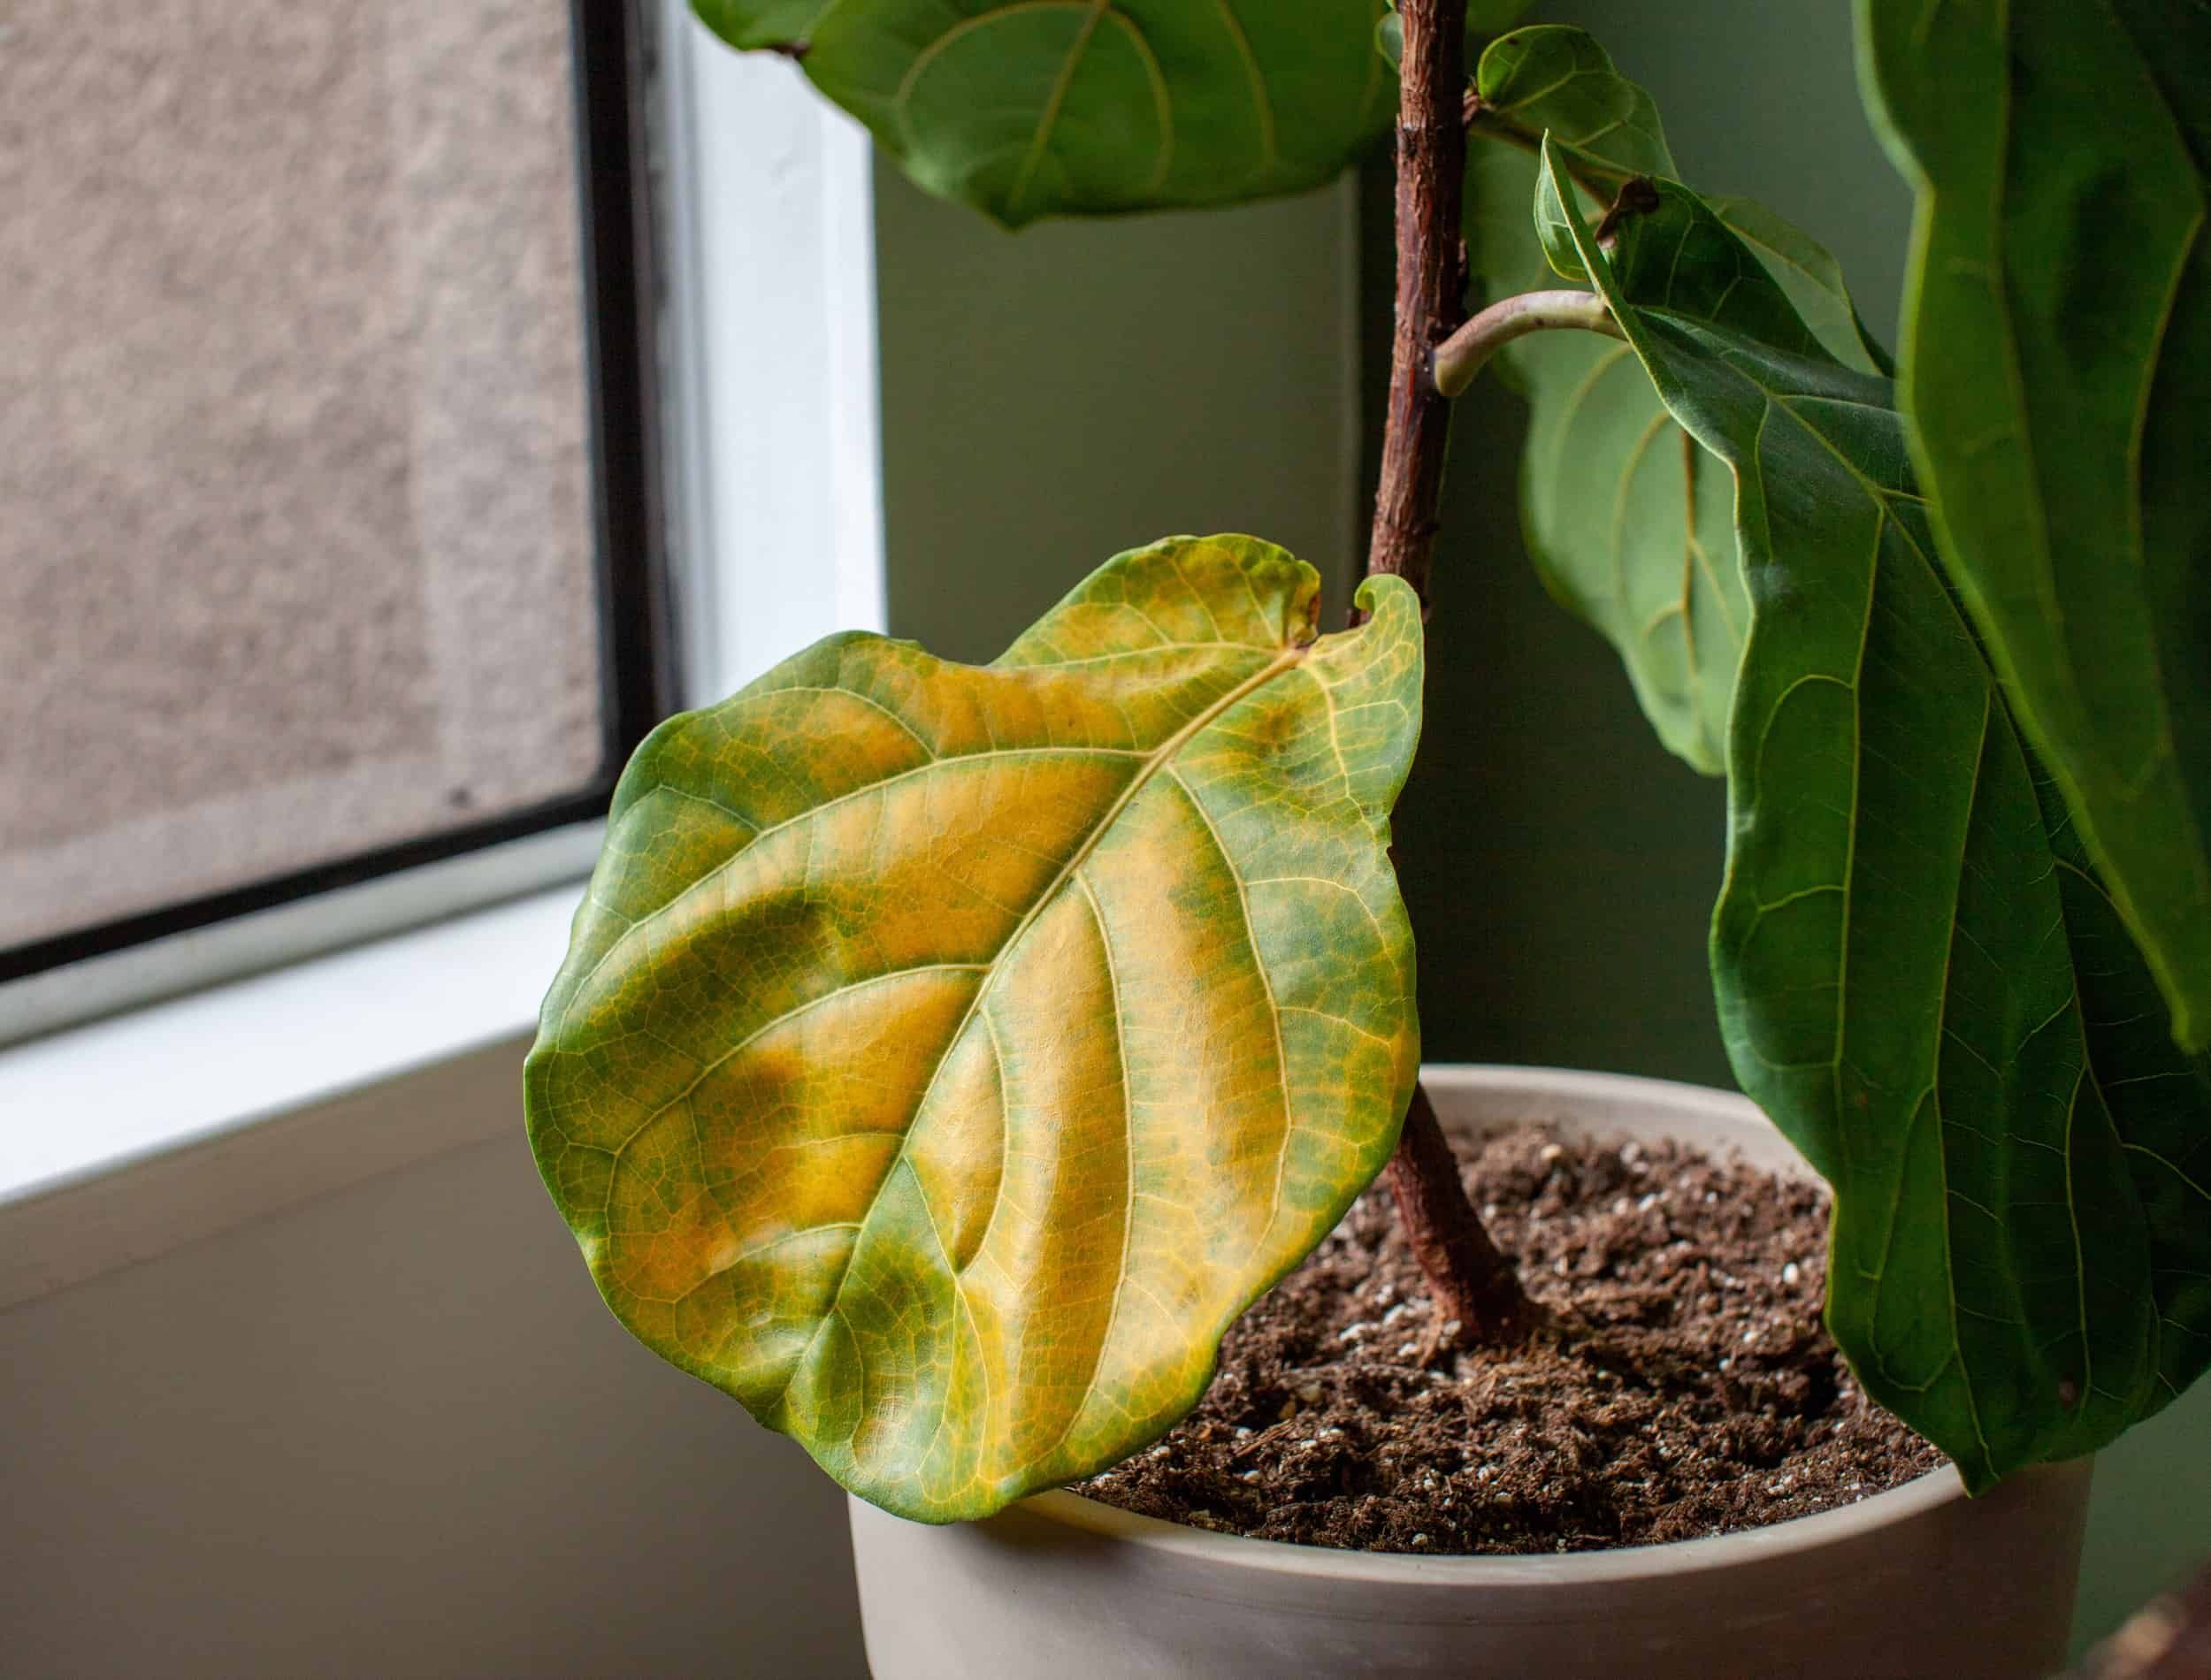 A beautiful fiddle leaf fig houseplant sits in a pot by a window for bright, indirect light, but has a large yellowing leaf. Overwatering or under fertilization may be the cause of the issue